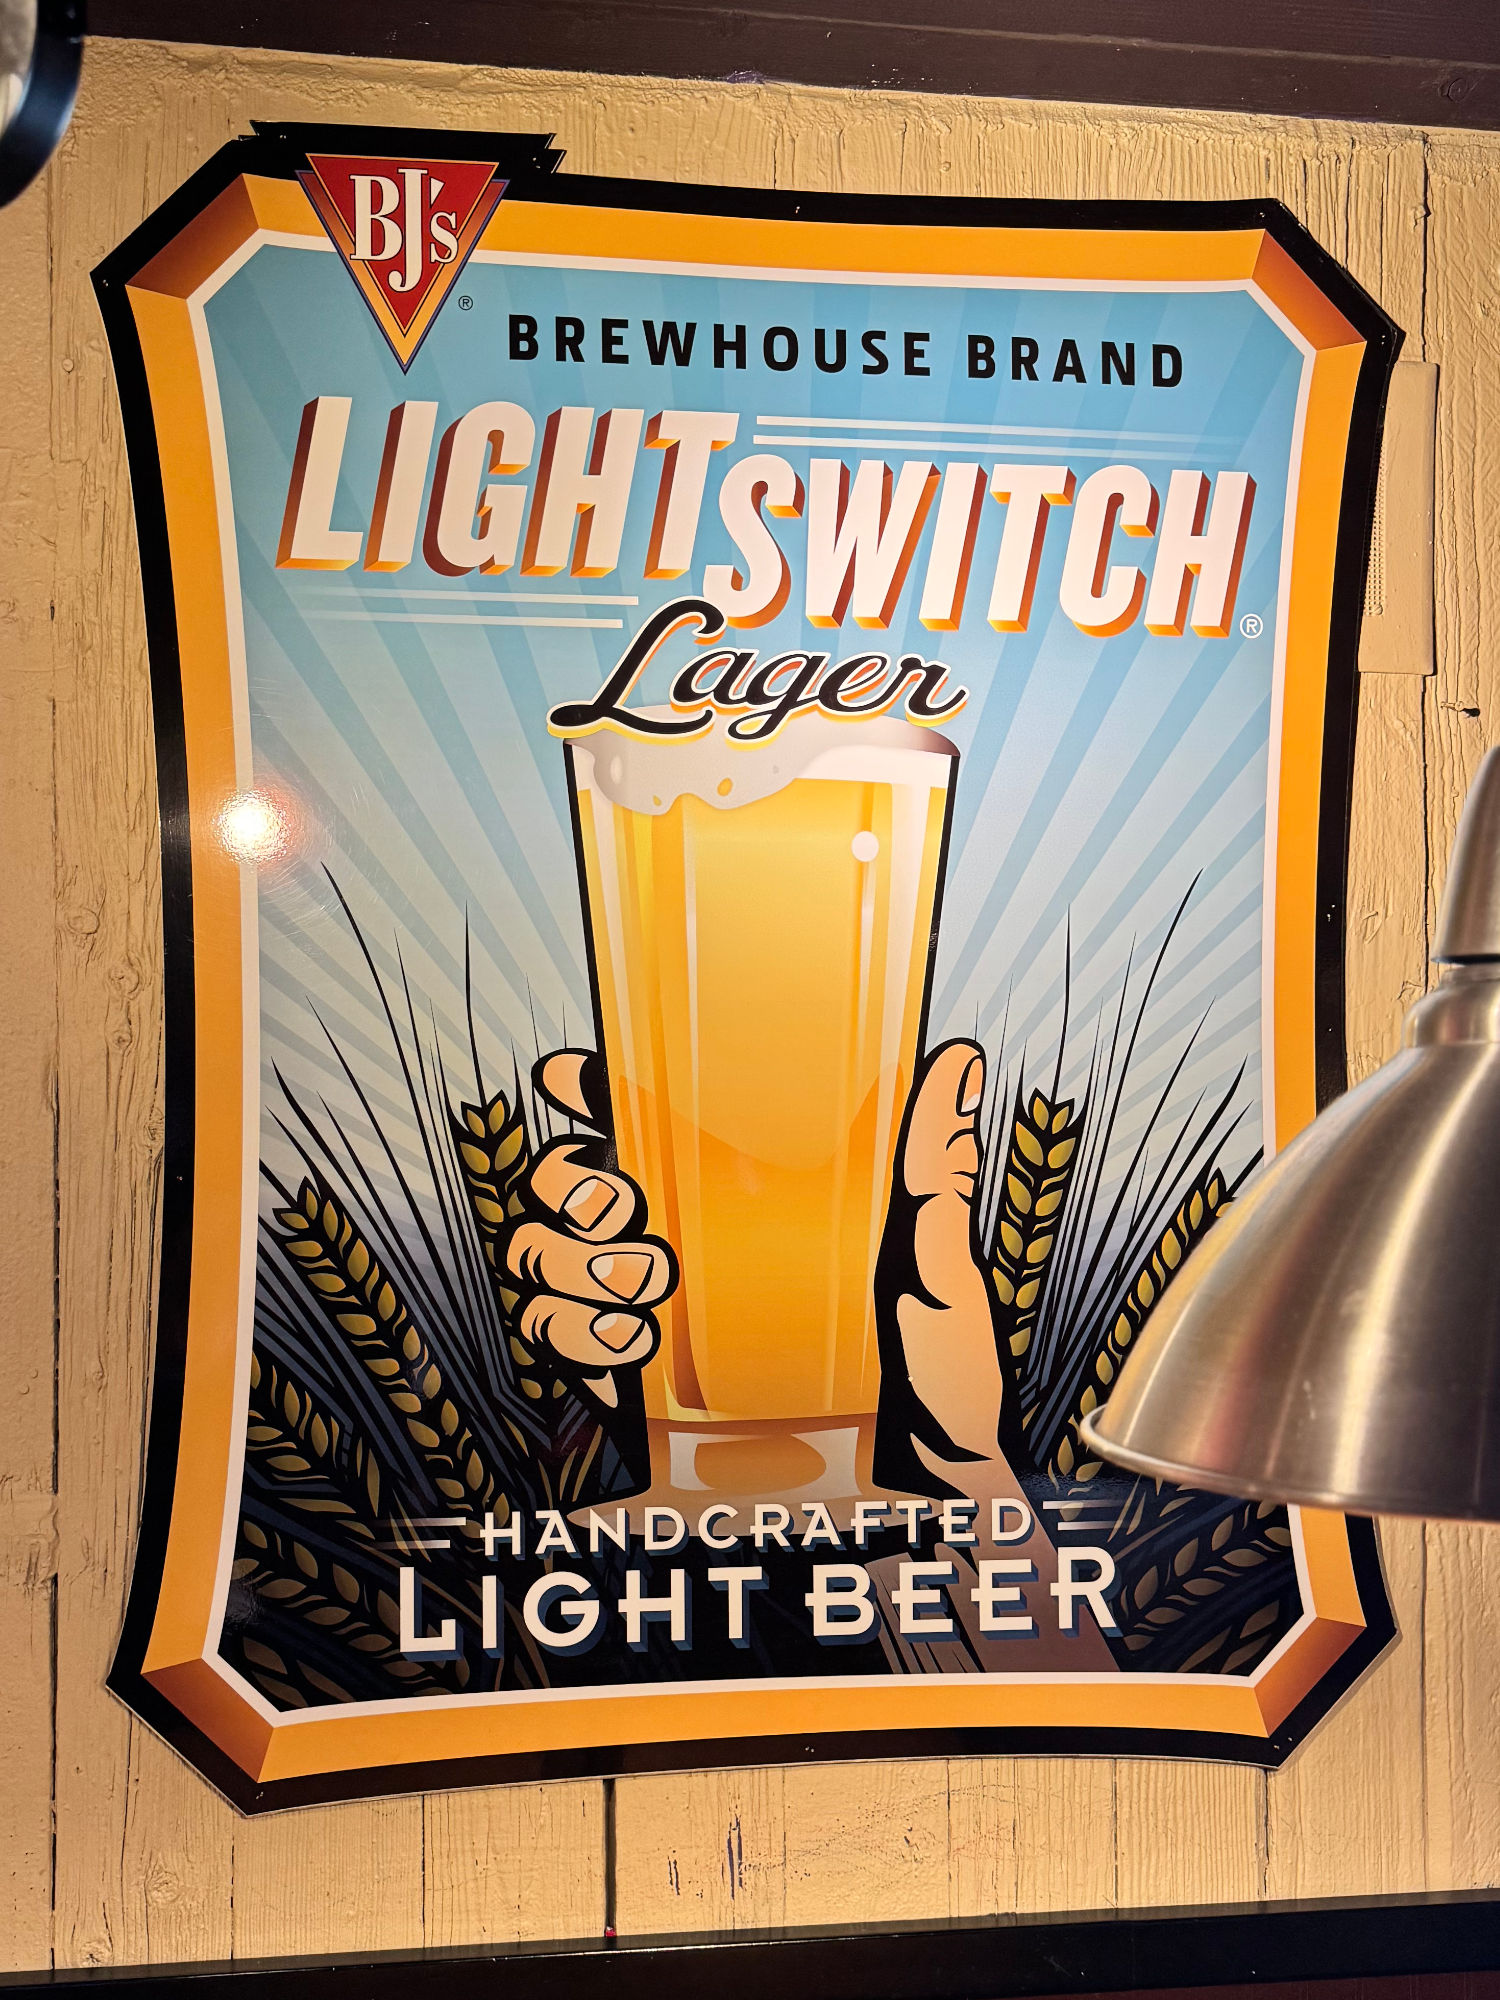 Bj's Brewhouse Light Switch Lager